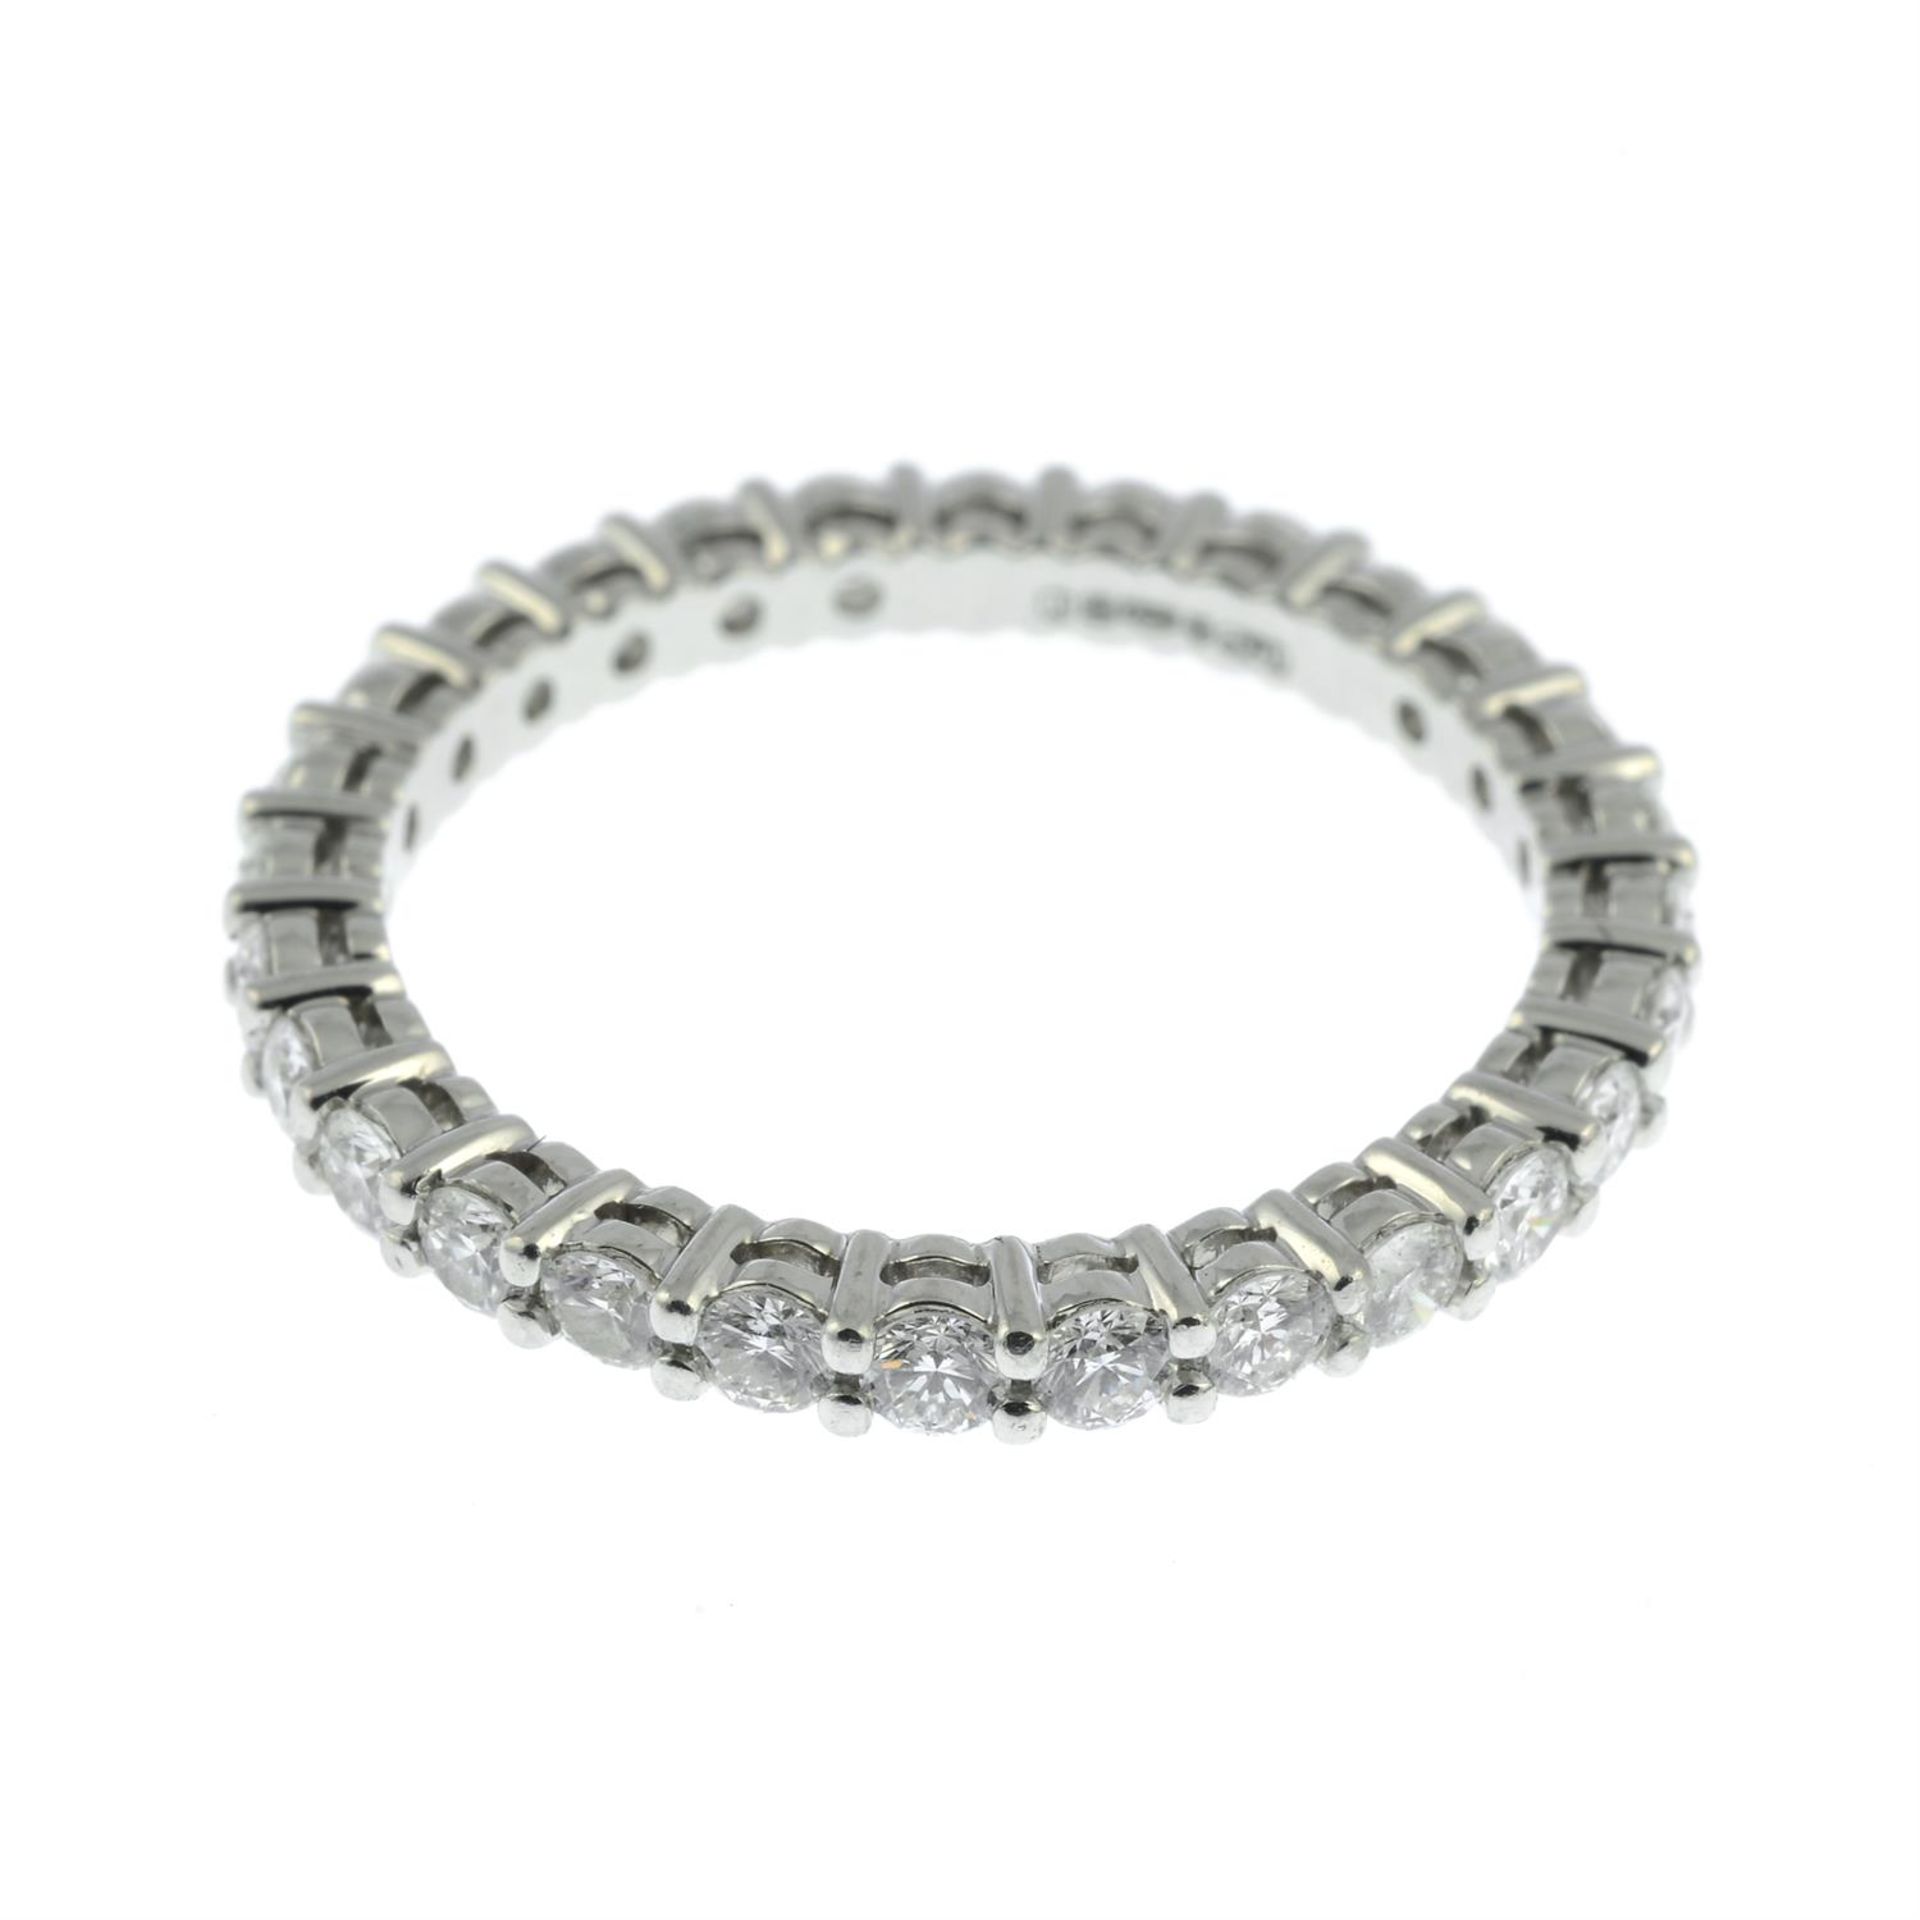 A platinum brilliant-cut diamond 'Embrace' full eternity ring, by Tiffany & Co. - Image 3 of 5